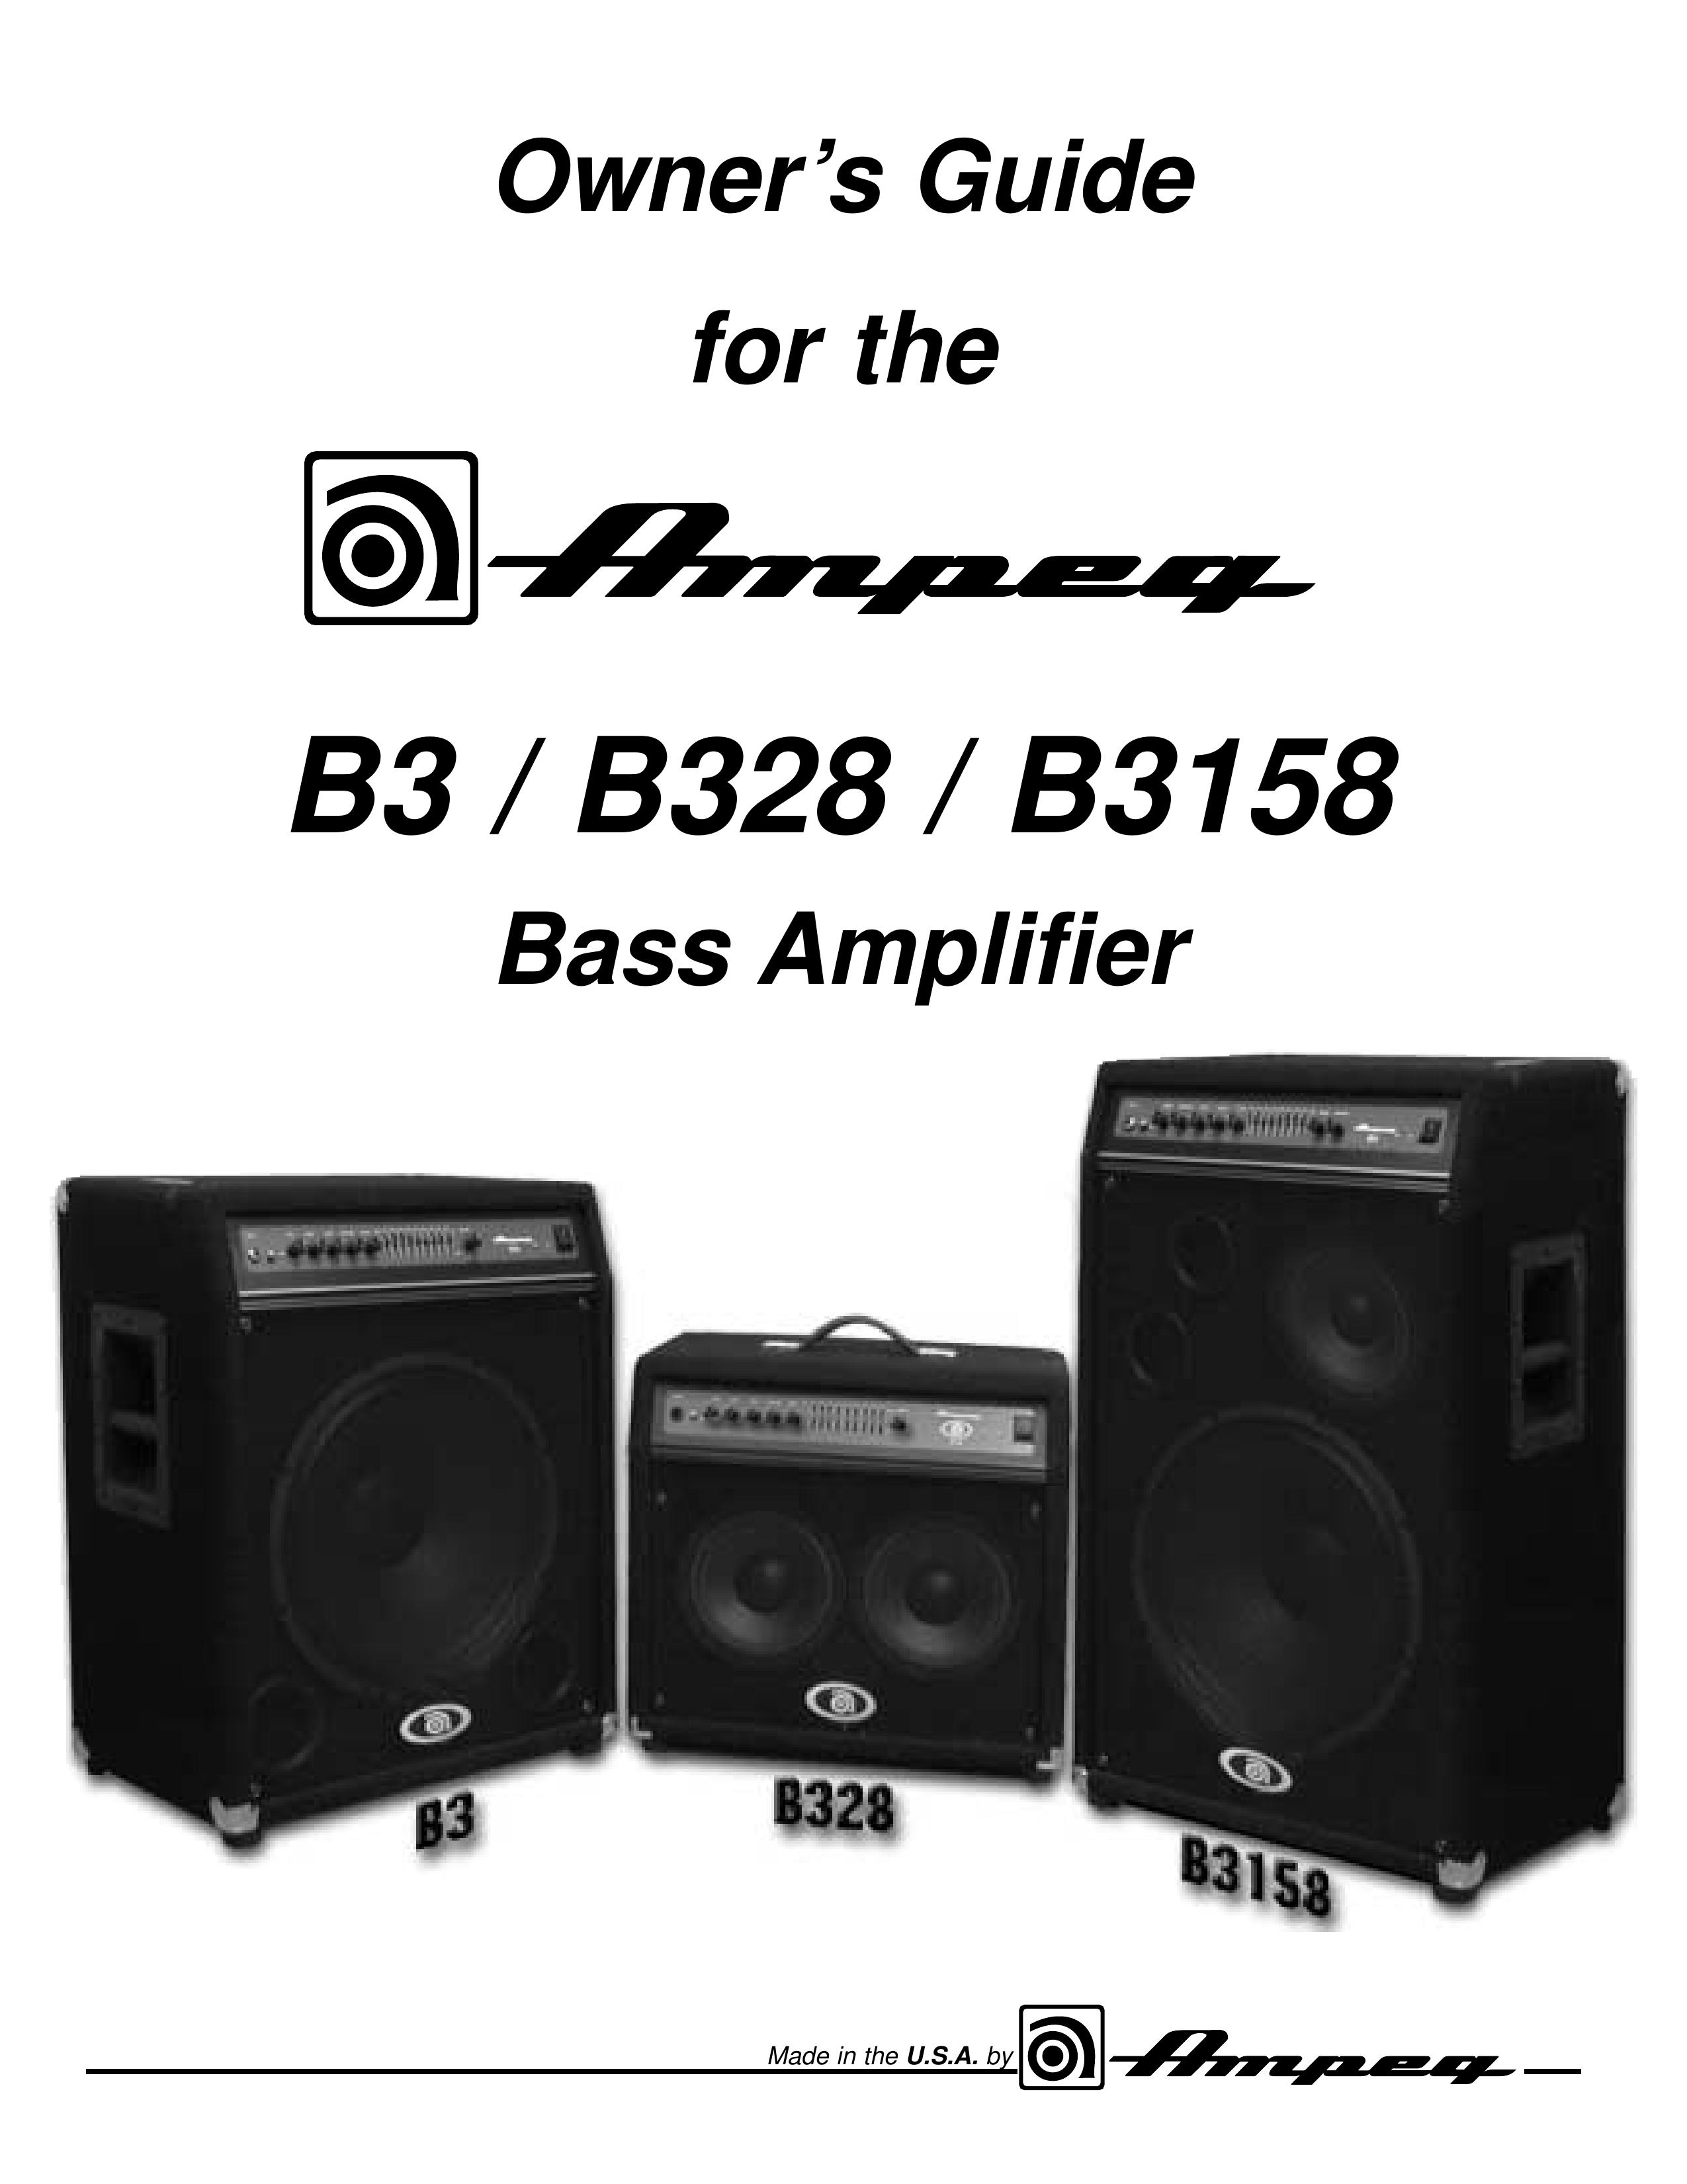 Ampeg B3158 Musical Instrument Amplifier User Manual (Page 1)